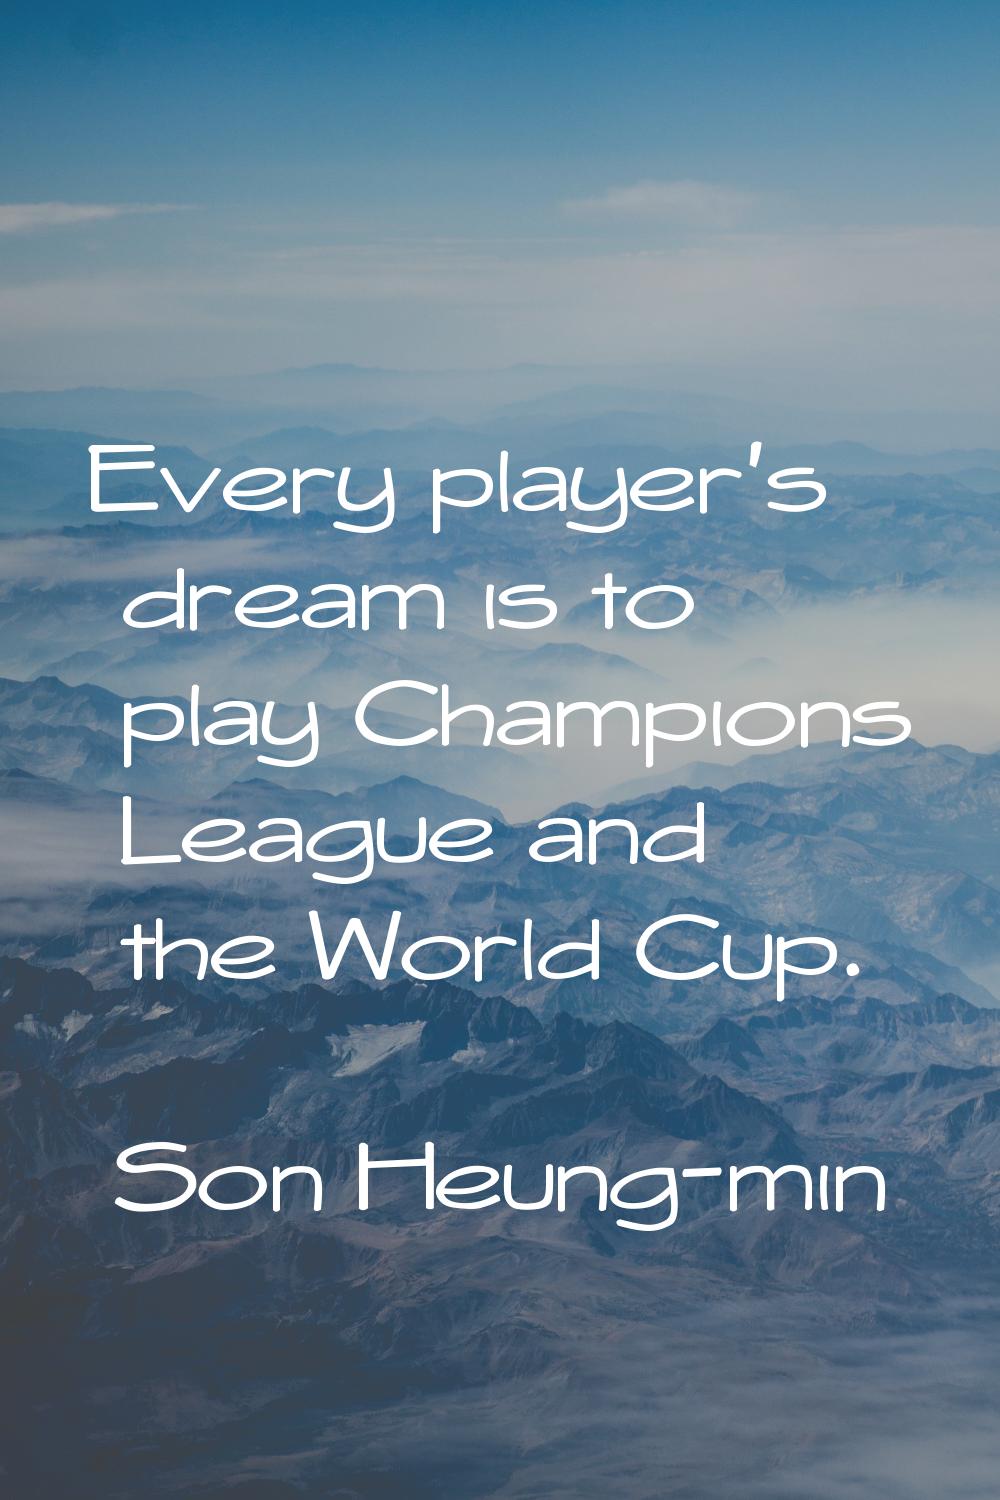 Every player's dream is to play Champions League and the World Cup.